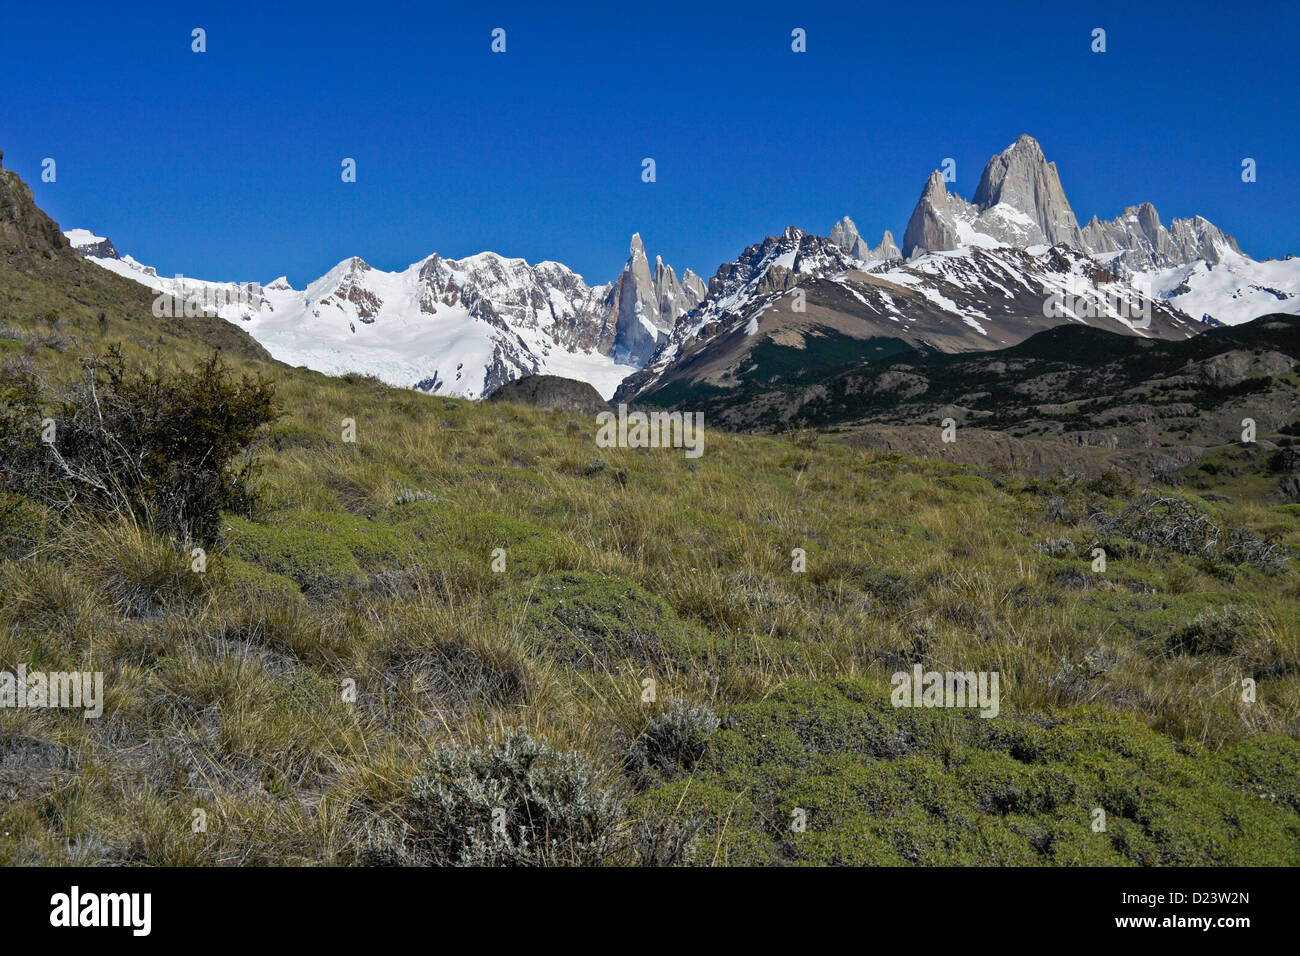 Mt. Fitz Roy and Cerro Torre, Fitz Roy Range of the Andes, Los Glaciares NP, Patagonia, Argentina Stock Photo